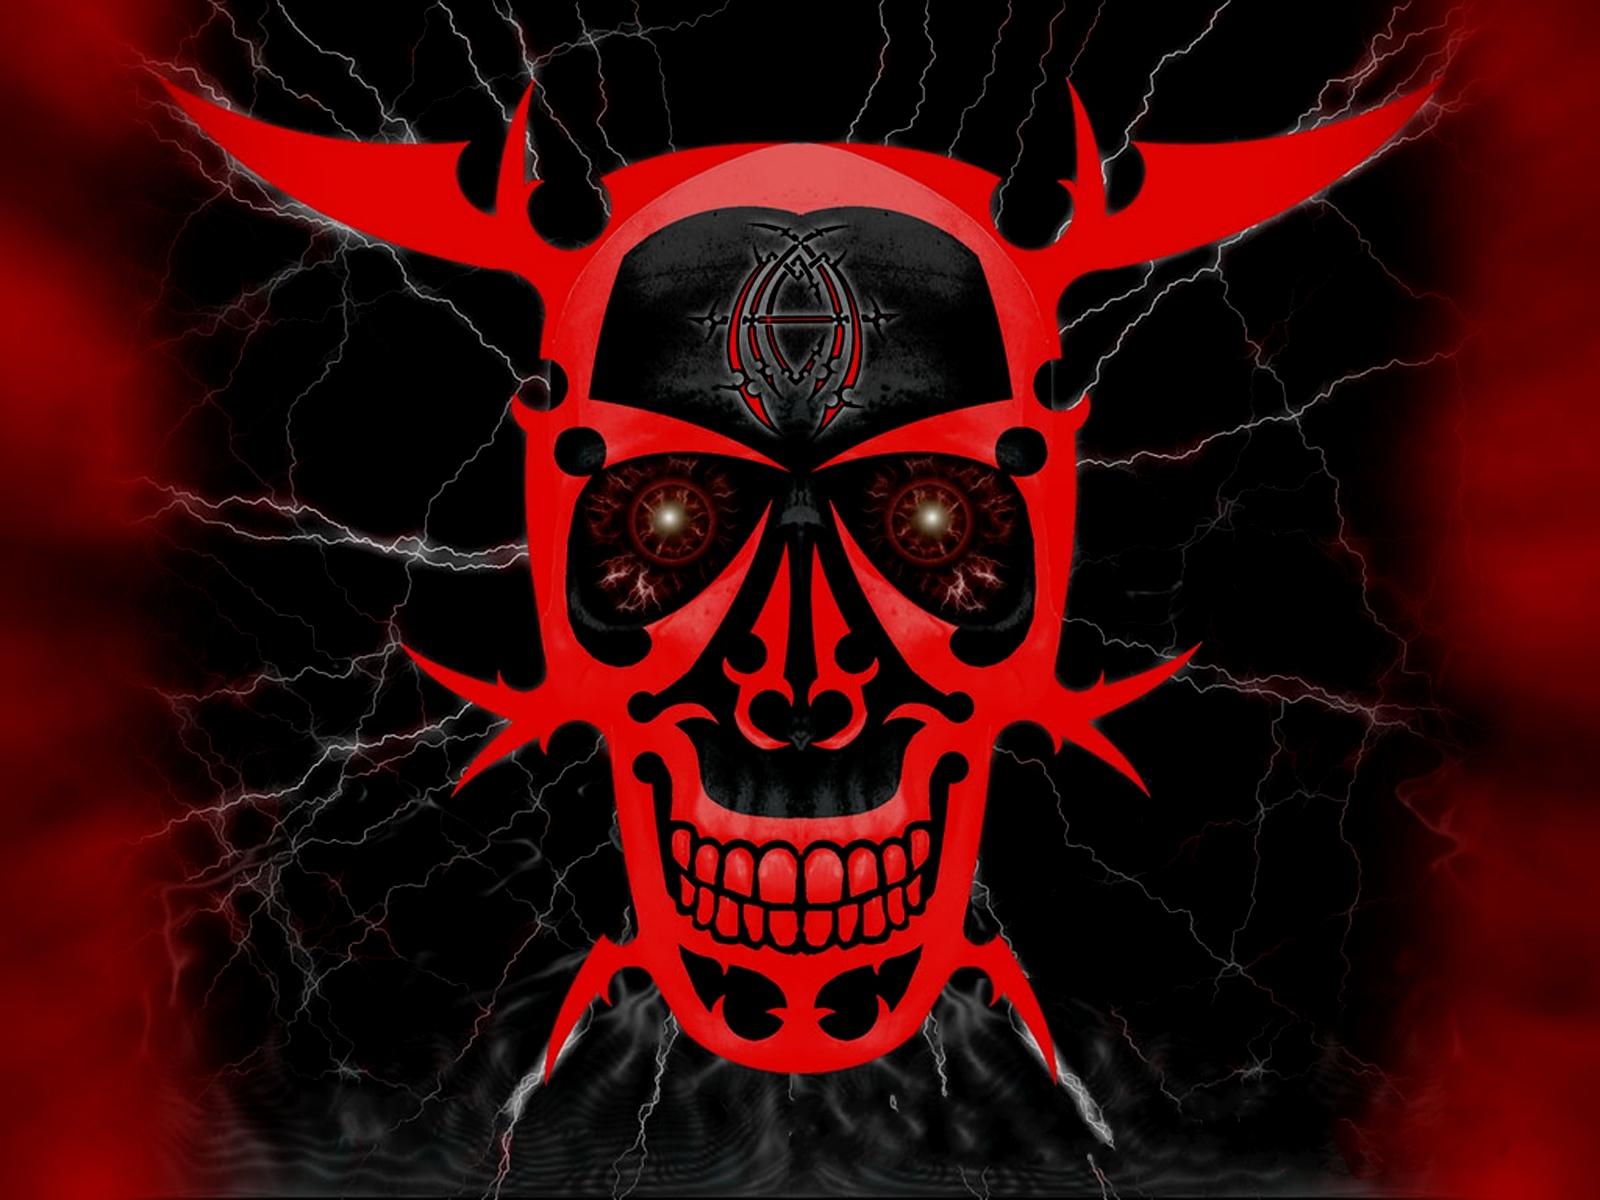 Android Skull Wallpapers Download cool HD wallpapers here